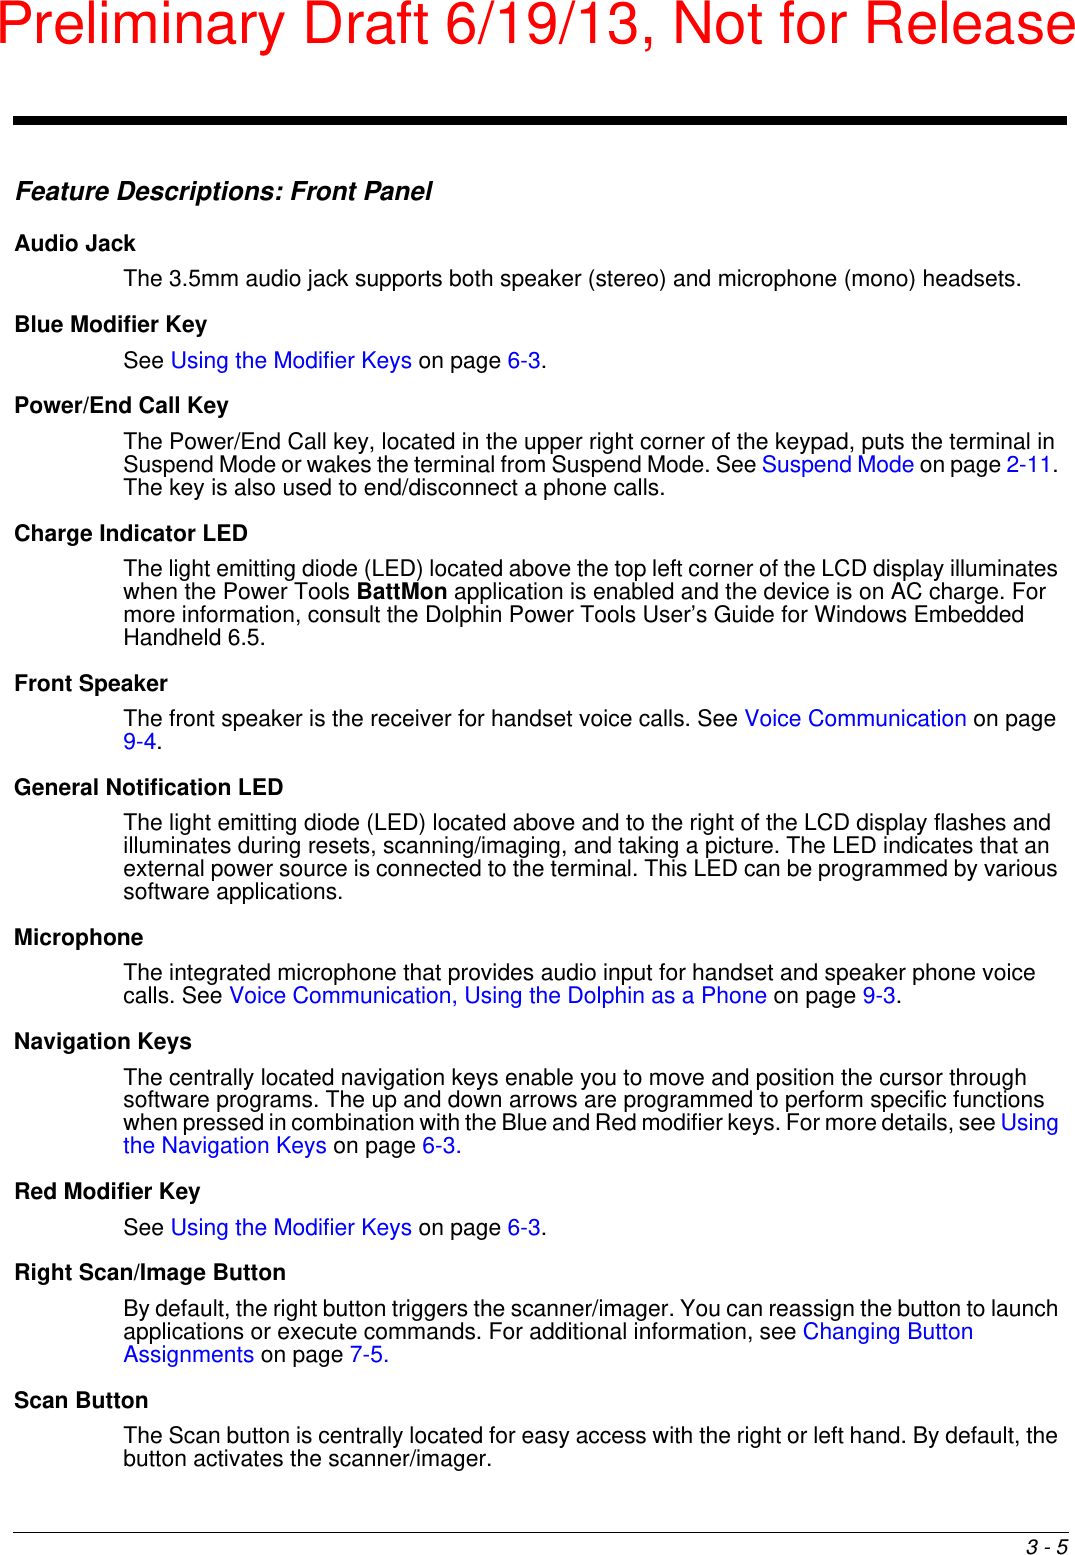 3 - 5Feature Descriptions: Front PanelAudio JackThe 3.5mm audio jack supports both speaker (stereo) and microphone (mono) headsets. Blue Modifier KeySee Using the Modifier Keys on page 6-3.Power/End Call KeyThe Power/End Call key, located in the upper right corner of the keypad, puts the terminal in Suspend Mode or wakes the terminal from Suspend Mode. See Suspend Mode on page 2-11. The key is also used to end/disconnect a phone calls.  Charge Indicator LEDThe light emitting diode (LED) located above the top left corner of the LCD display illuminates when the Power Tools BattMon application is enabled and the device is on AC charge. For more information, consult the Dolphin Power Tools User’s Guide for Windows Embedded Handheld 6.5.Front SpeakerThe front speaker is the receiver for handset voice calls. See Voice Communication on page 9-4.General Notification LEDThe light emitting diode (LED) located above and to the right of the LCD display flashes and illuminates during resets, scanning/imaging, and taking a picture. The LED indicates that an external power source is connected to the terminal. This LED can be programmed by various software applications.MicrophoneThe integrated microphone that provides audio input for handset and speaker phone voice calls. See Voice Communication, Using the Dolphin as a Phone on page 9-3.Navigation KeysThe centrally located navigation keys enable you to move and position the cursor through software programs. The up and down arrows are programmed to perform specific functions when pressed in combination with the Blue and Red modifier keys. For more details, see Using the Navigation Keys on page 6-3.Red Modifier KeySee Using the Modifier Keys on page 6-3.Right Scan/Image ButtonBy default, the right button triggers the scanner/imager. You can reassign the button to launch applications or execute commands. For additional information, see Changing Button Assignments on page 7-5. Scan ButtonThe Scan button is centrally located for easy access with the right or left hand. By default, the button activates the scanner/imager. Preliminary Draft 6/19/13, Not for Release